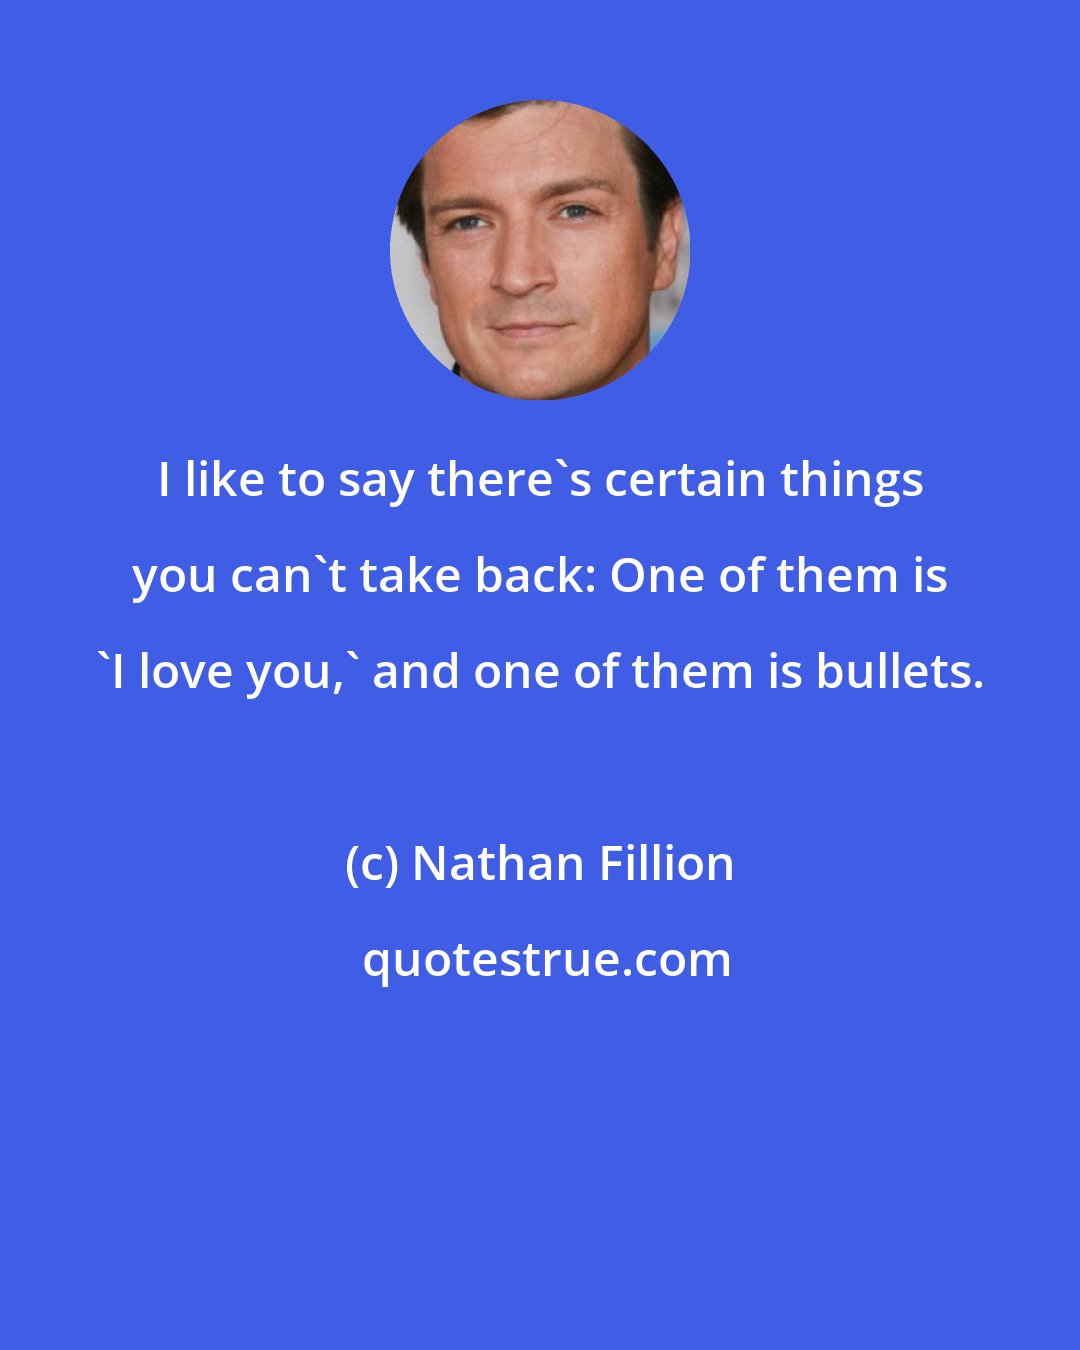 Nathan Fillion: I like to say there's certain things you can't take back: One of them is 'I love you,' and one of them is bullets.